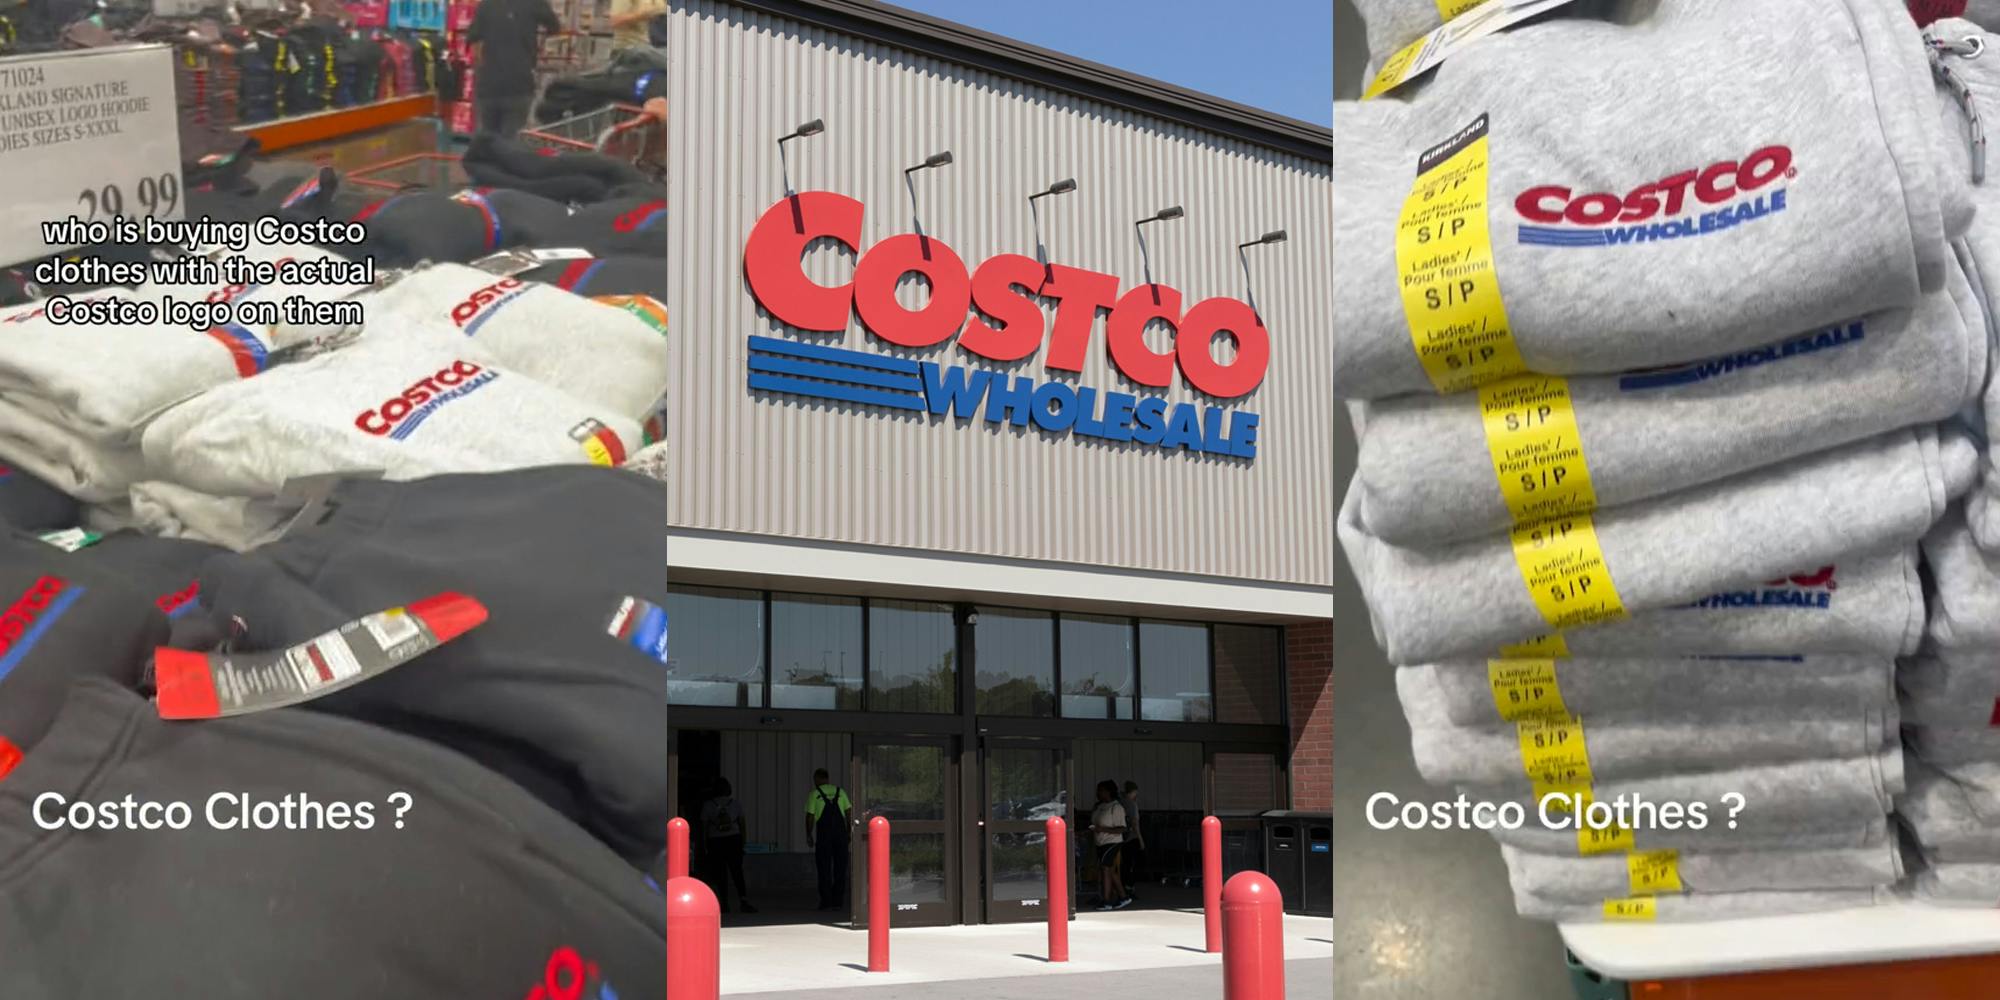 Costco clothes in store with caption "Costco Clothes? who is buying Costco clothes with the actual logo on them" (l) Costco building with sign (c) Costco clothes in store with caption "Costco Clothes?" (r)